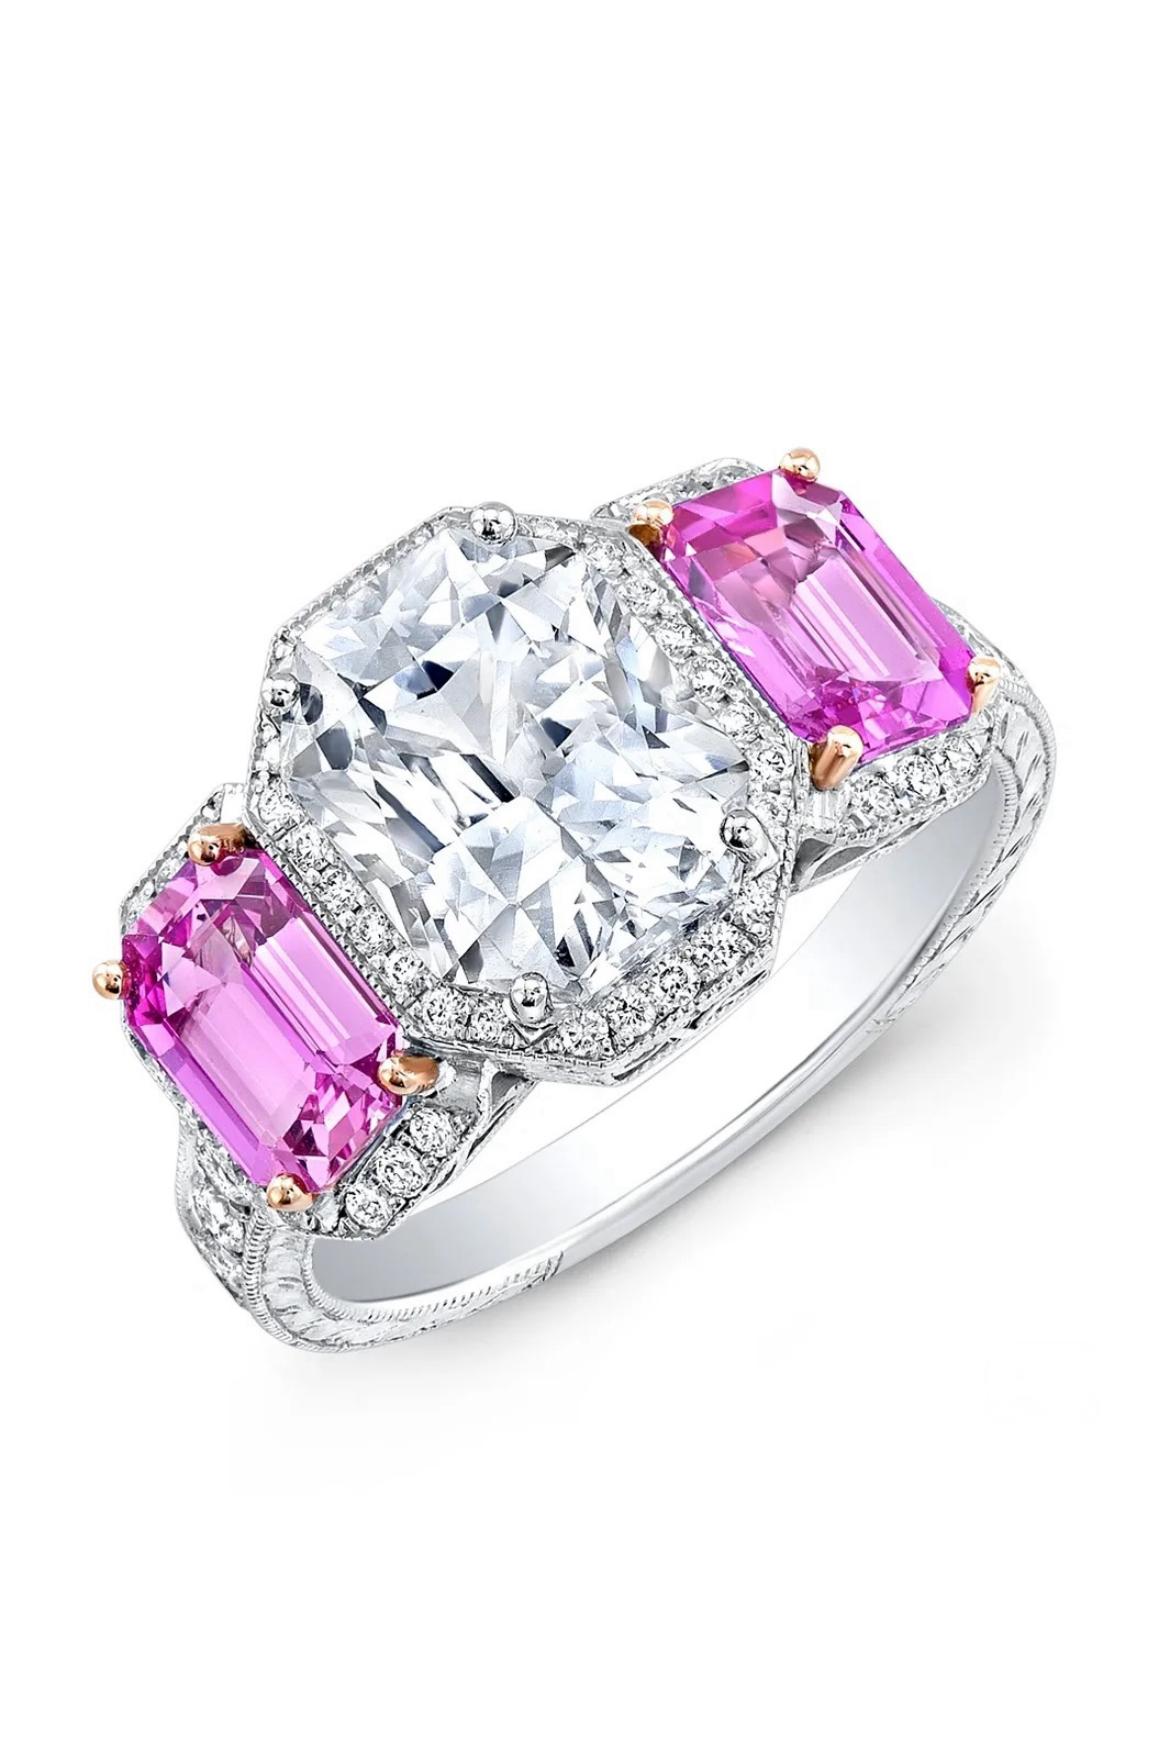 A radiant-cut 3.82-carat, white sapphire makes a dazzling display with two pink sapphires 2.25cts, and round diamonds totaling 0.60cts in 18K white gold. GIA certified.